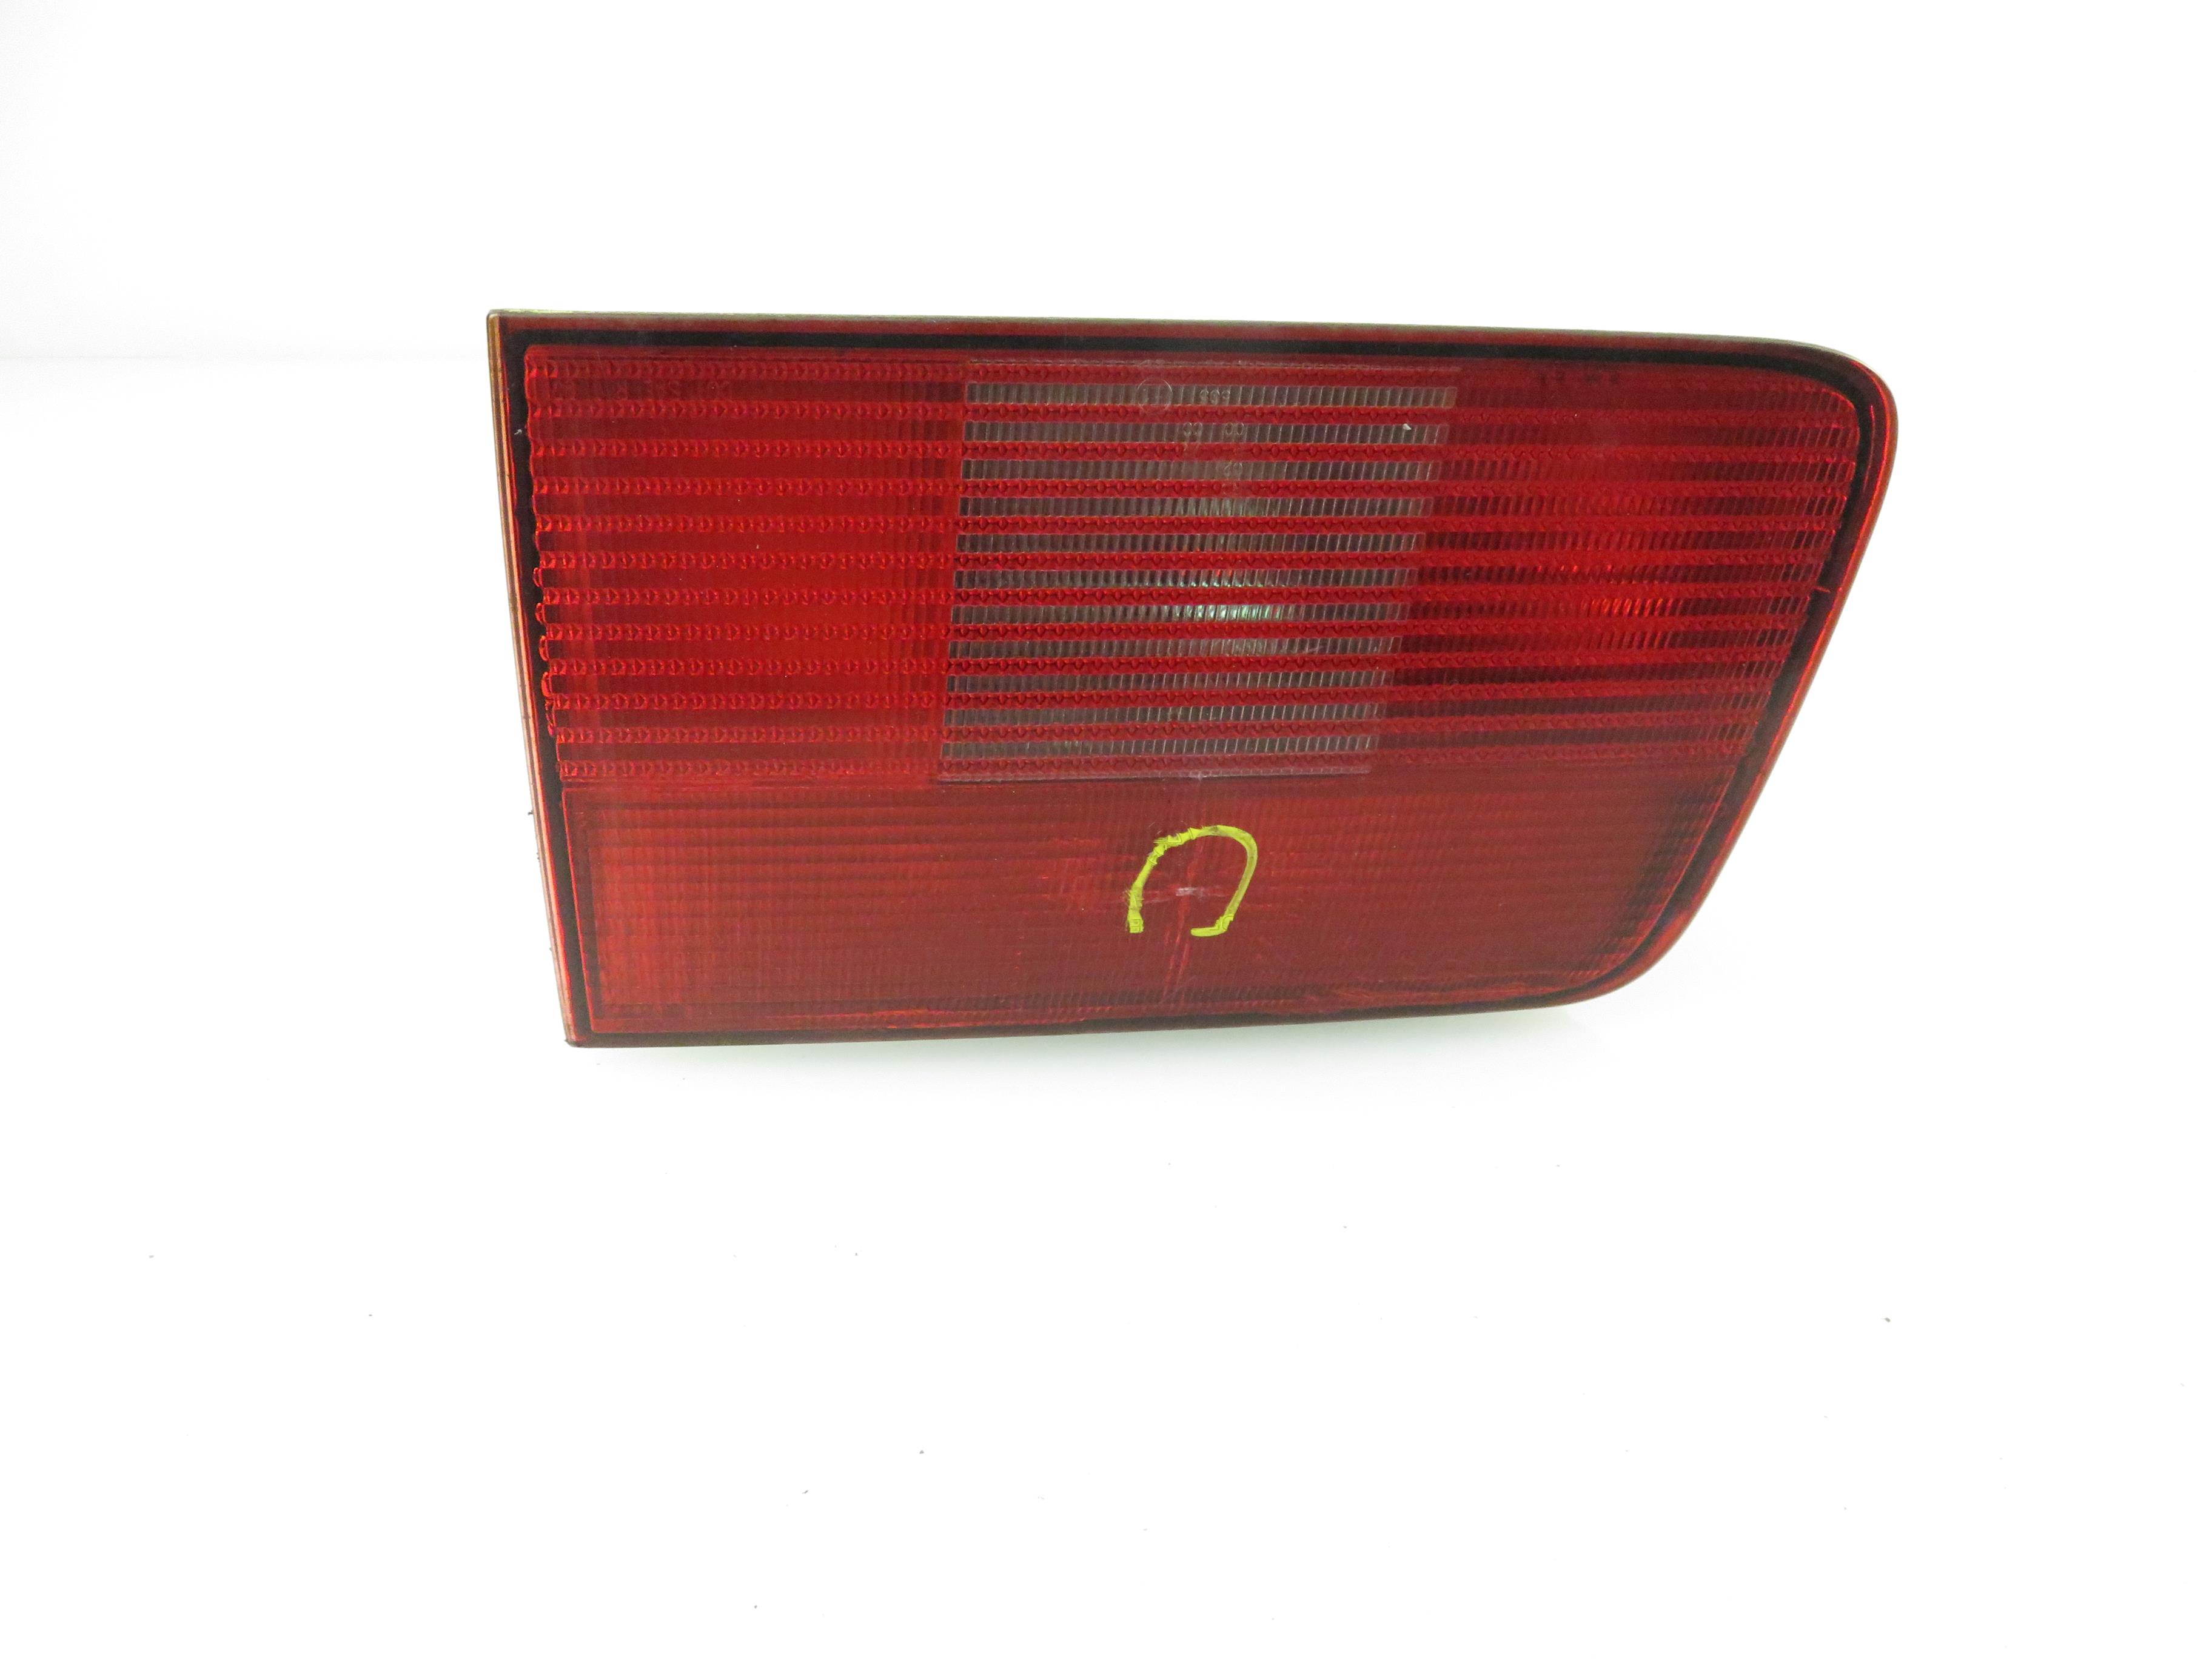 BMW 5 Series E39 (1995-2004) Rear Right Taillight Lamp 8361674 21858029